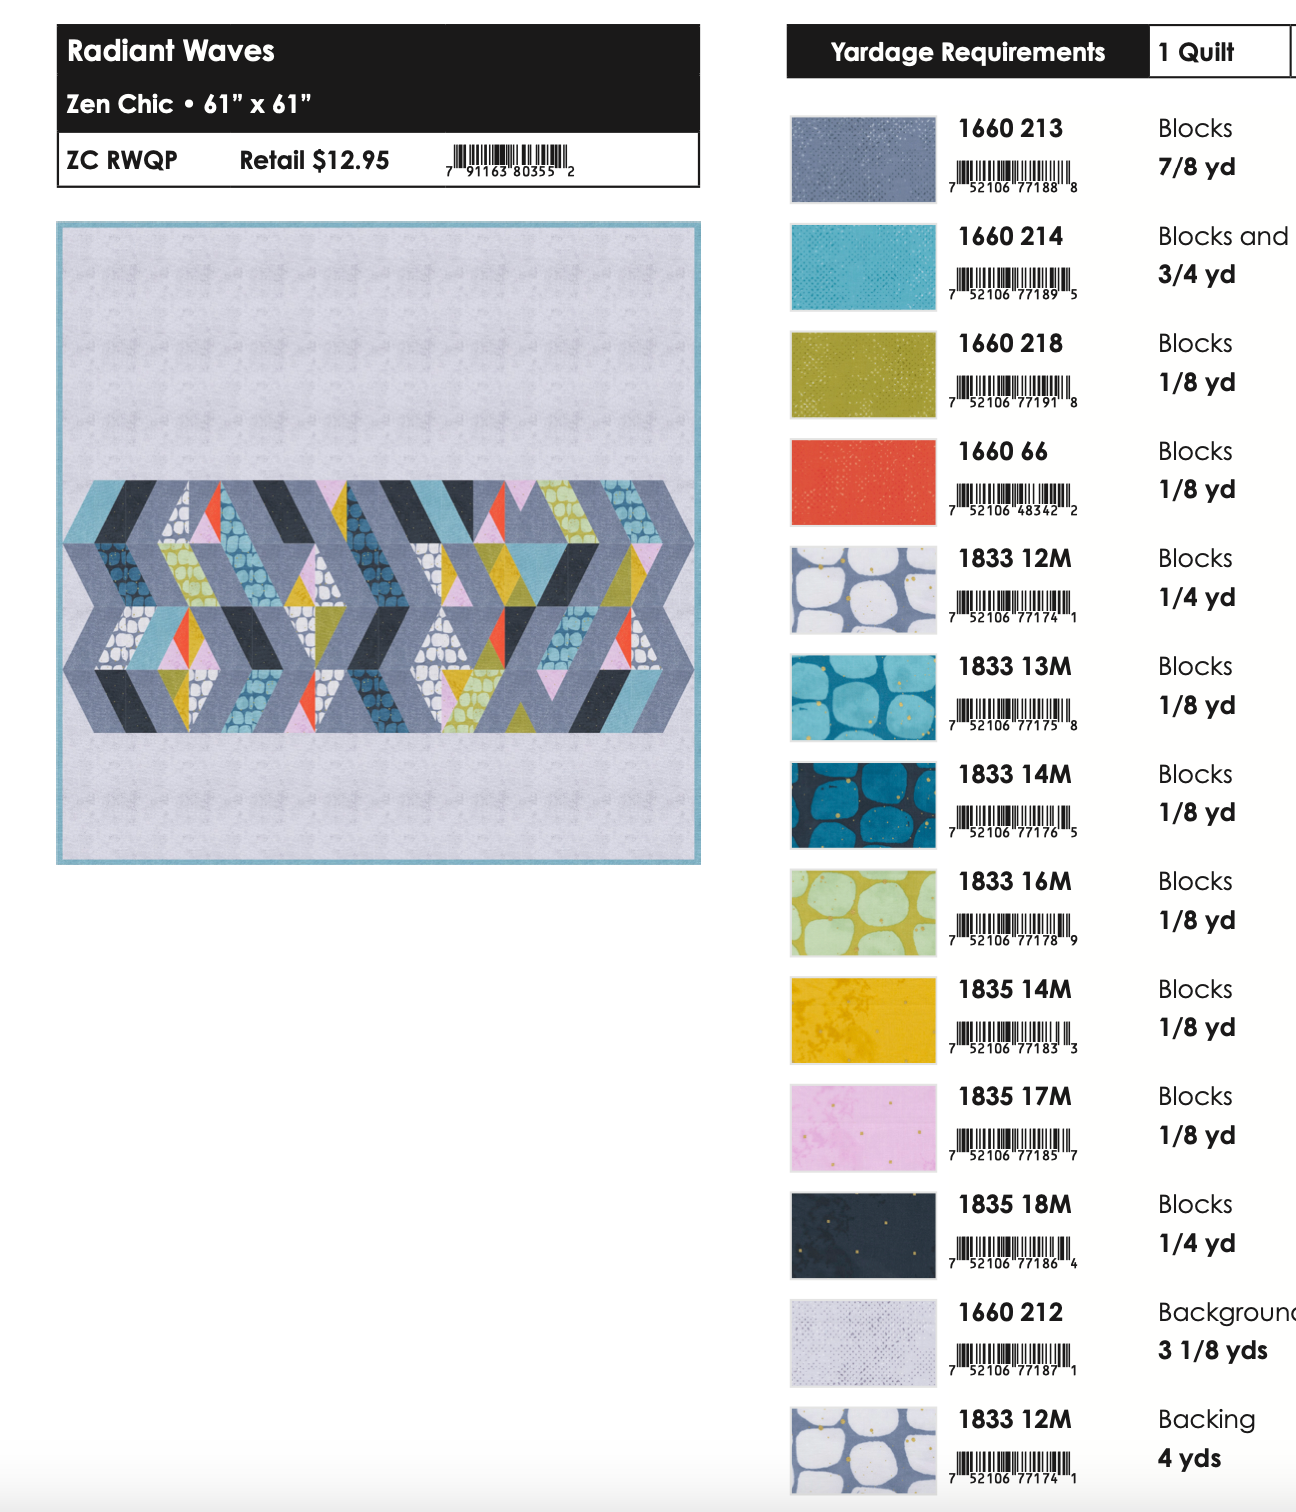 Radiant Waves Quilt Pattern by Zen Chic